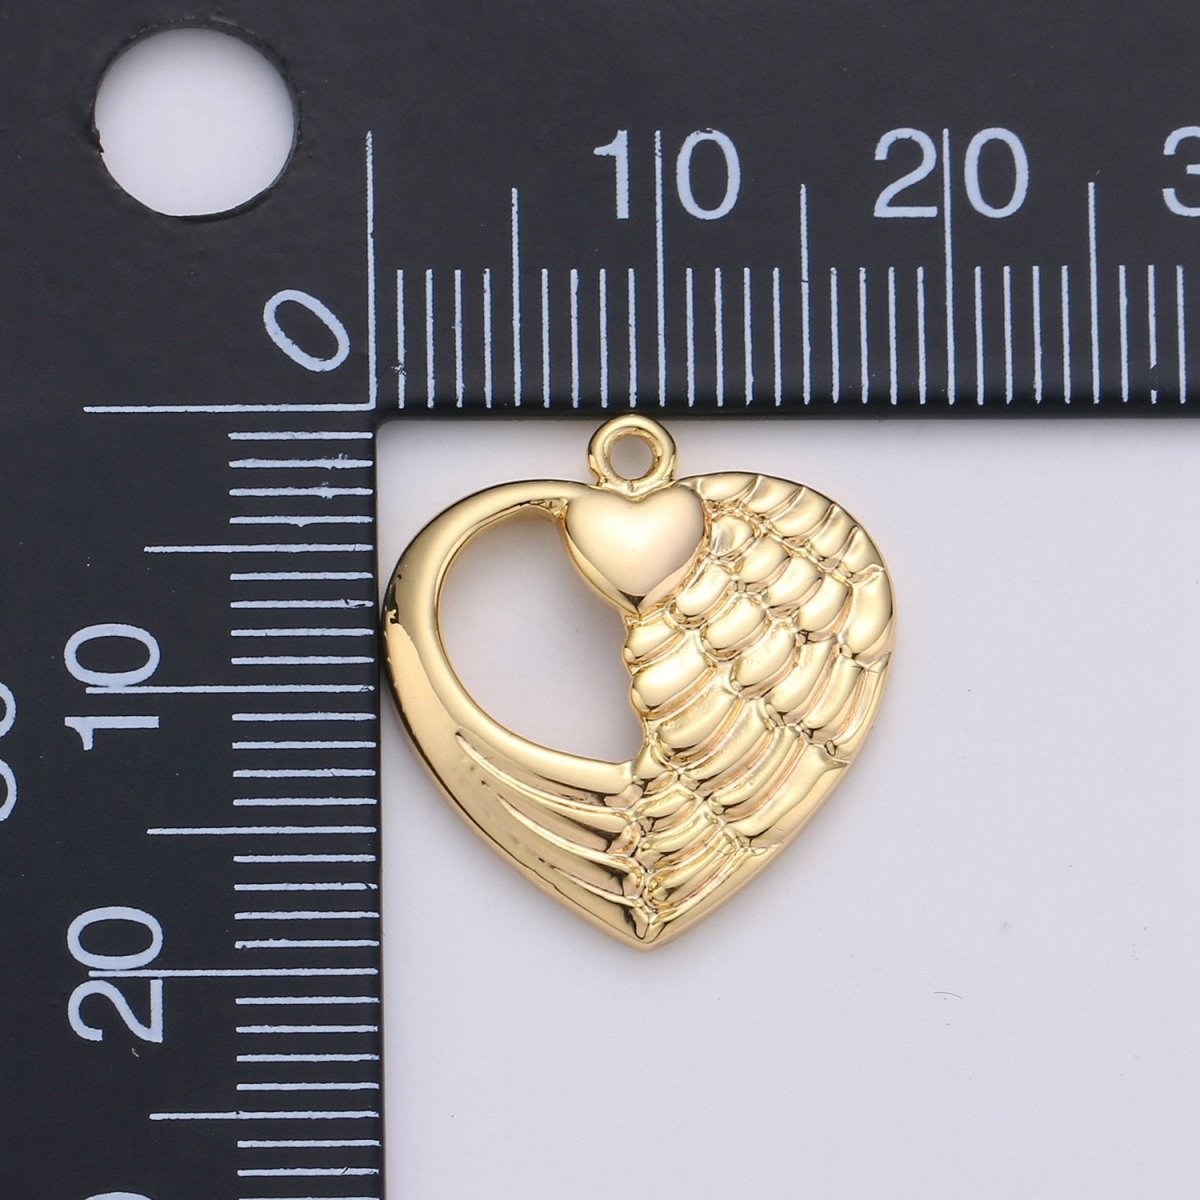 24K Gold Filled Beautiful Angel Wing Dainty Charm with Heart Love Symbol for Necklace or Bracelet, C-870 - DLUXCA